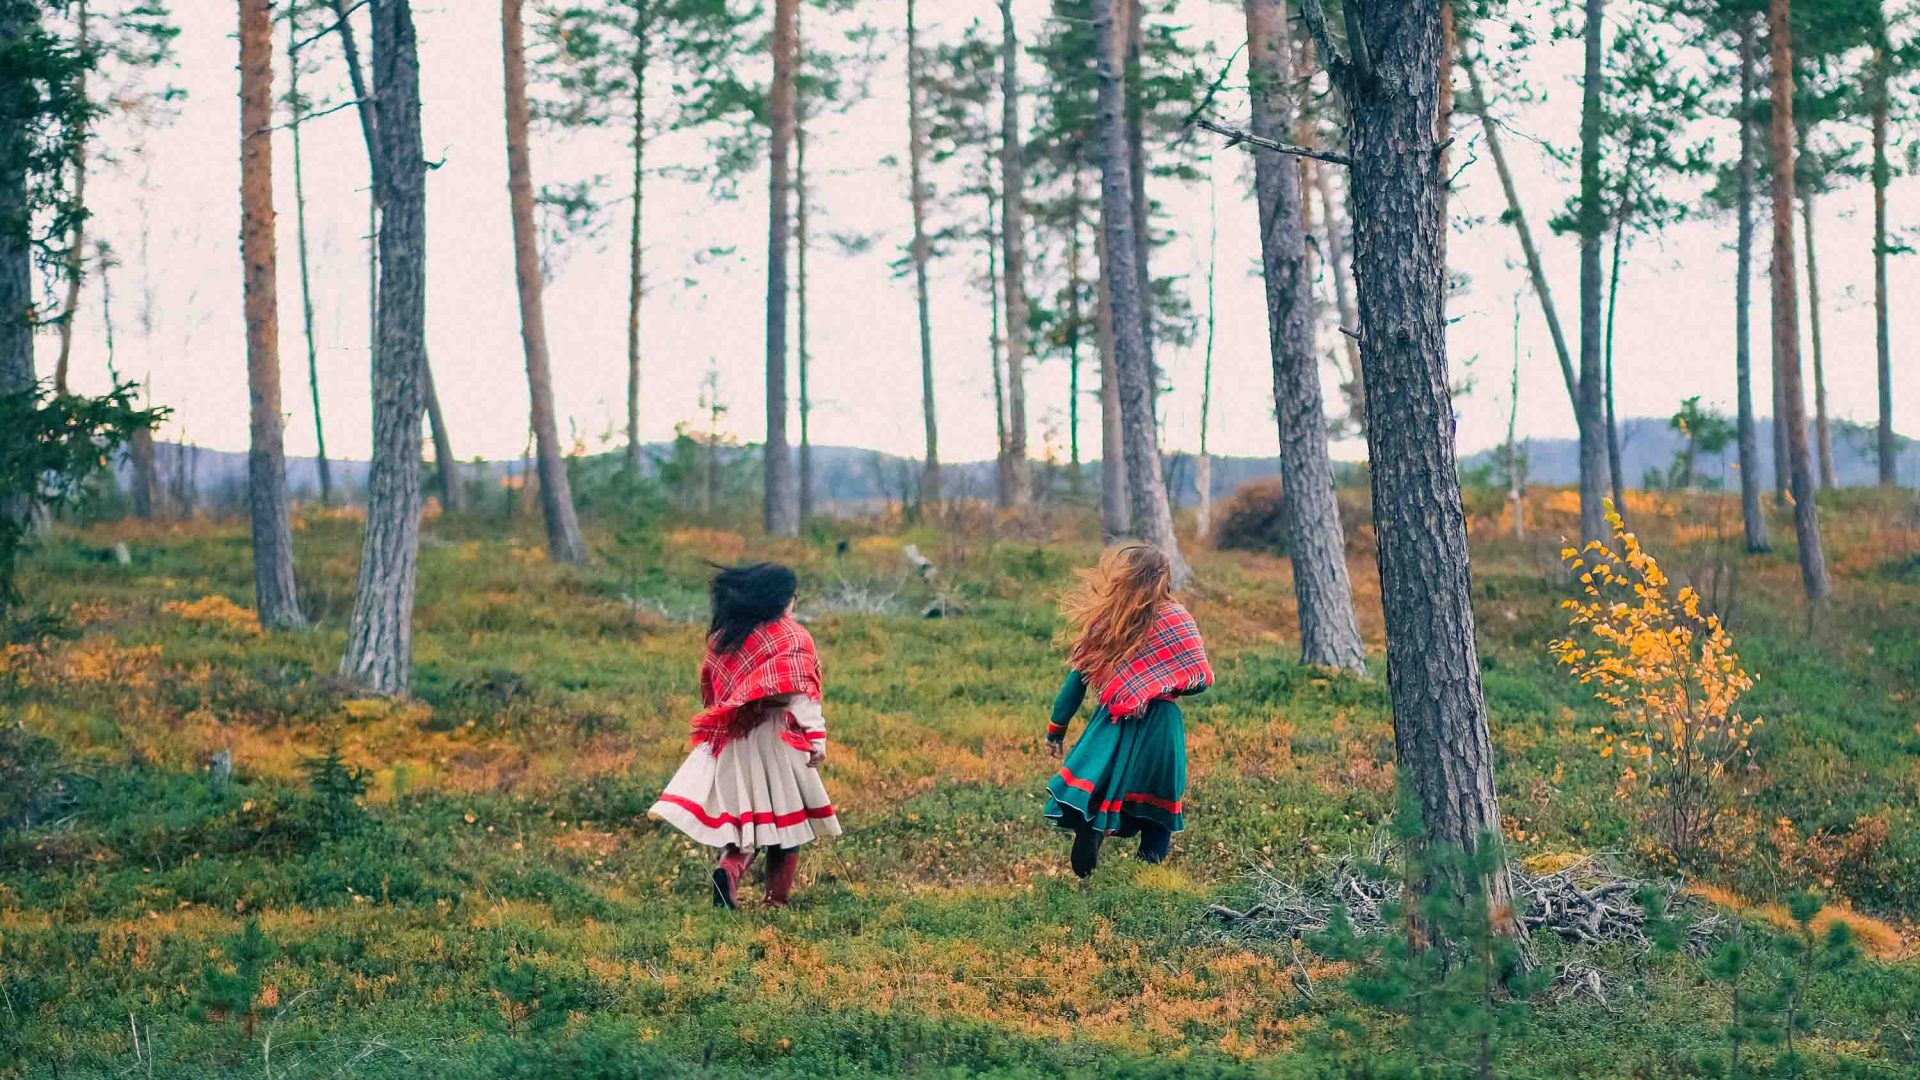 The backs of two women in colorful dresses run through forest.